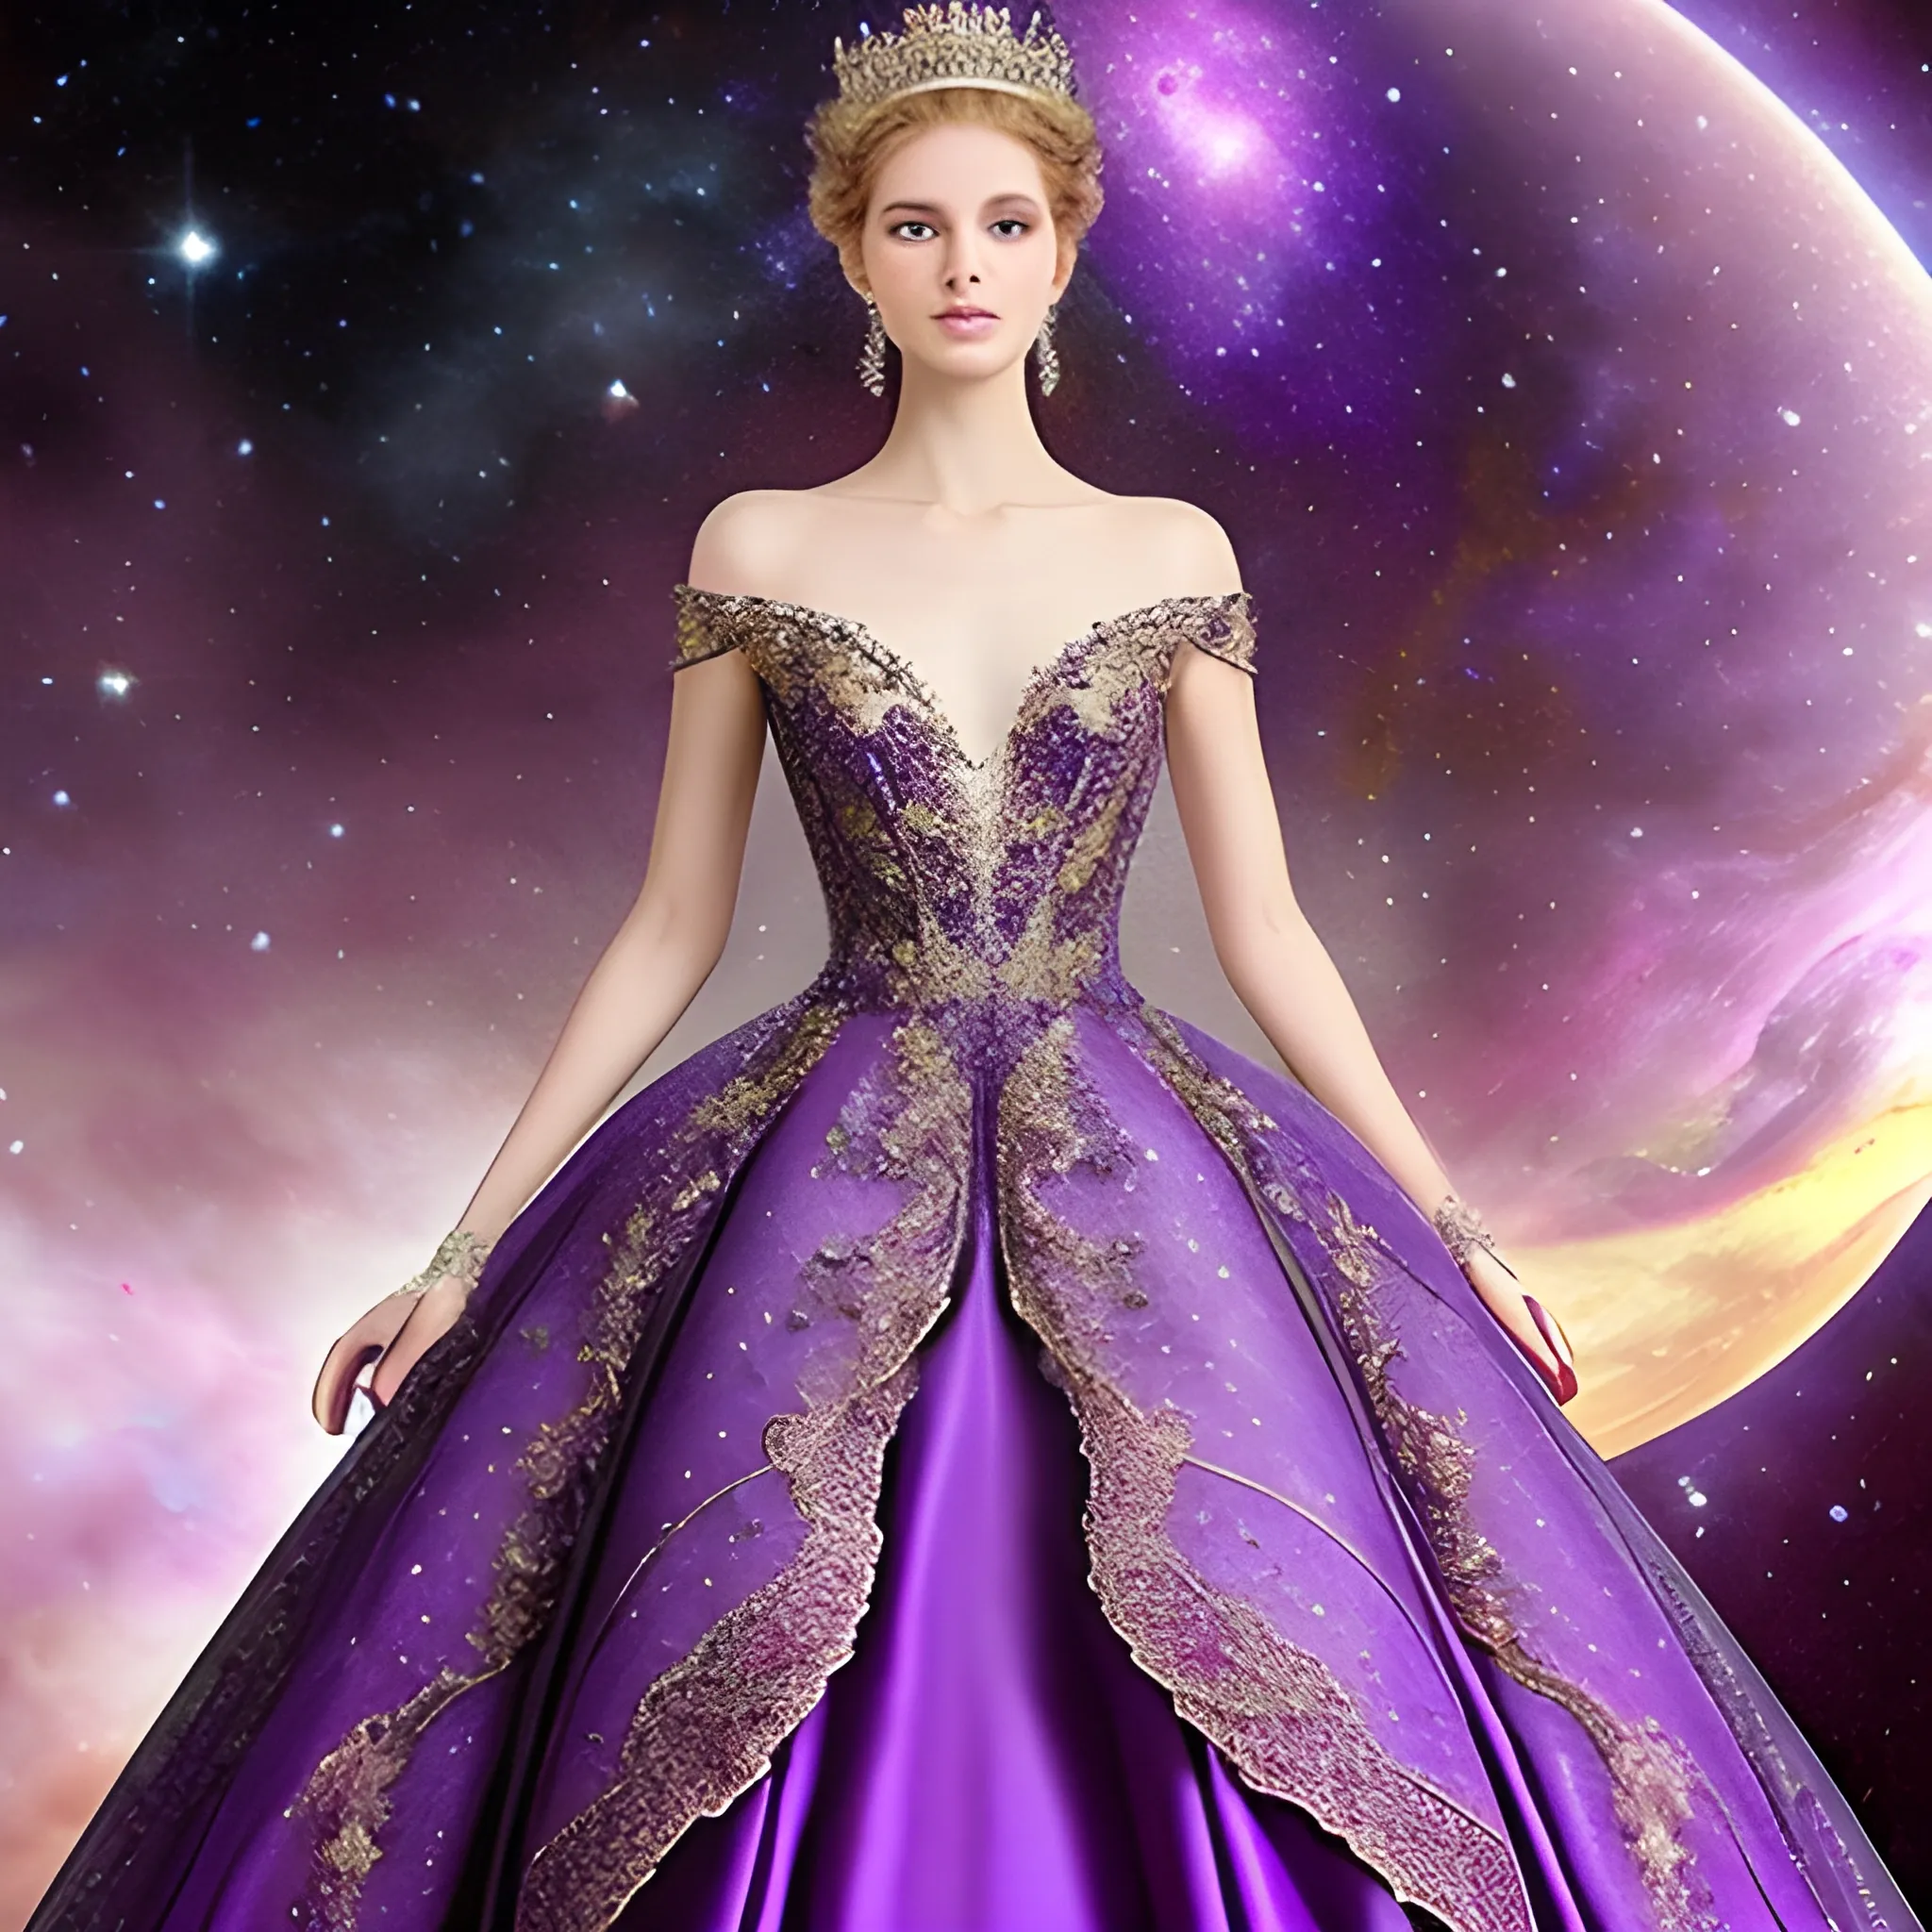 Intricate detail fantasy wedding gown purple and gold lace goddess dream dress puffy stardust galaxy queen